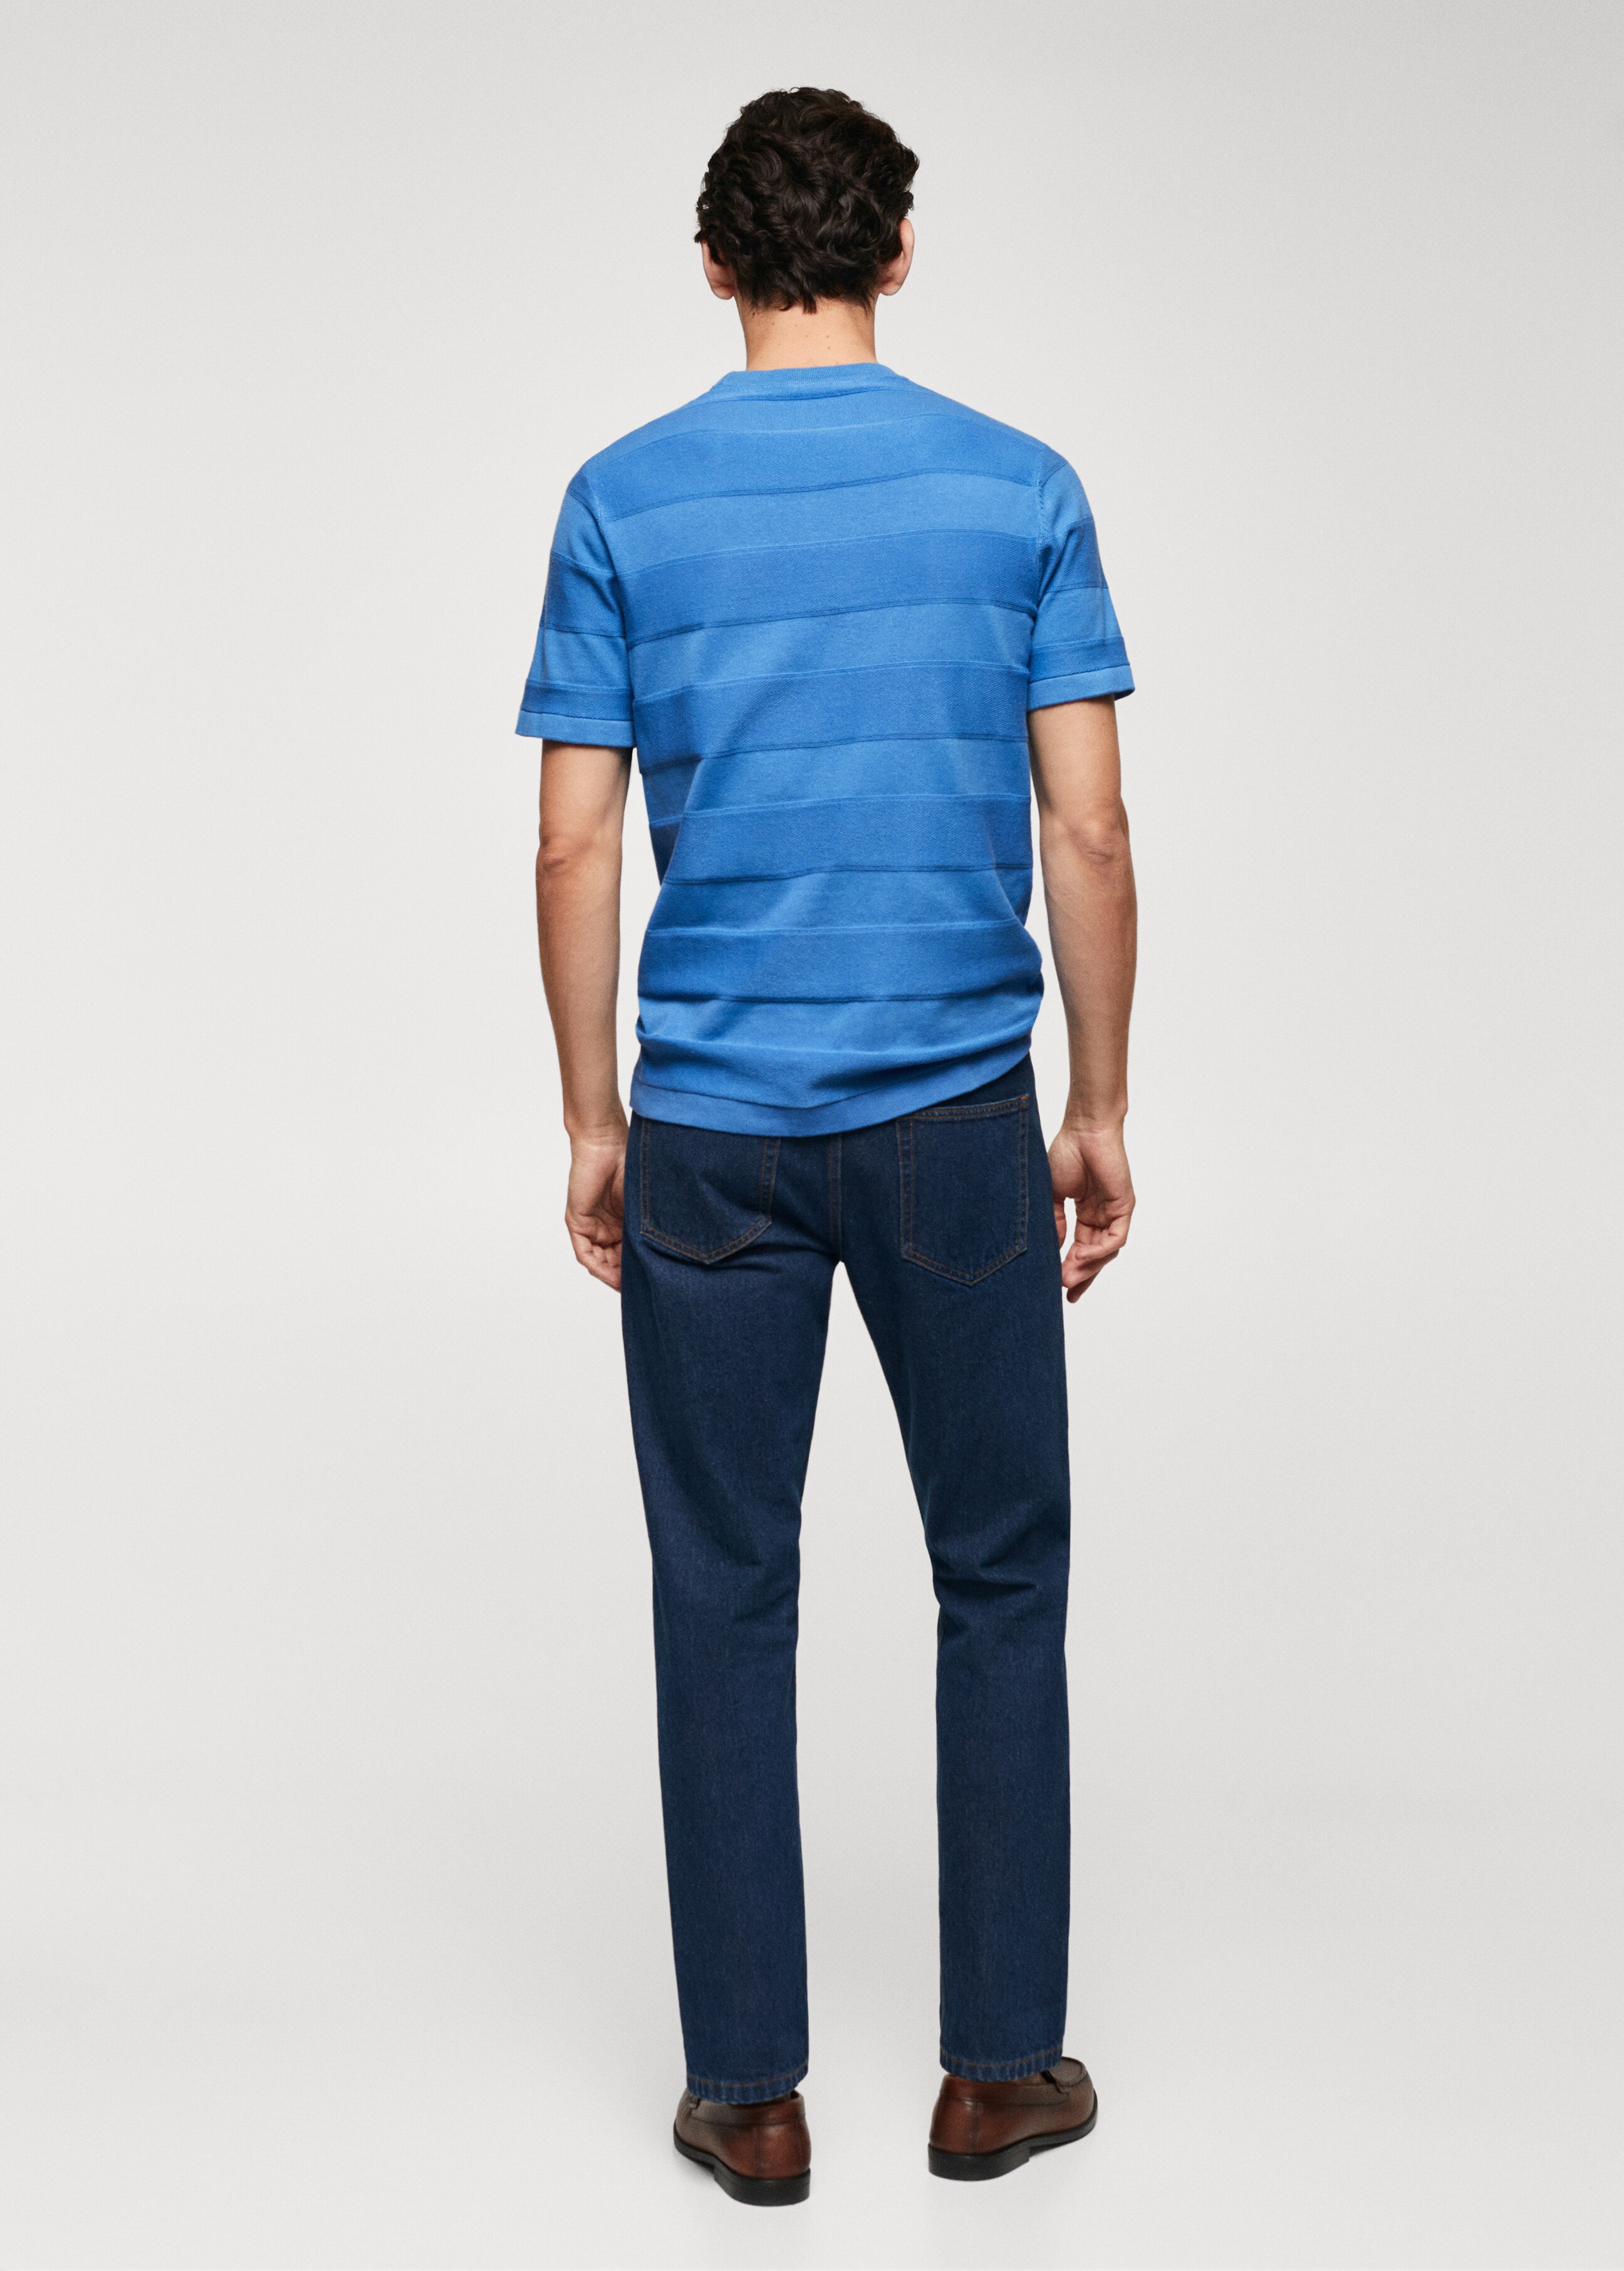 Cotton knitted t-shirt with striped structure - Reverse of the article